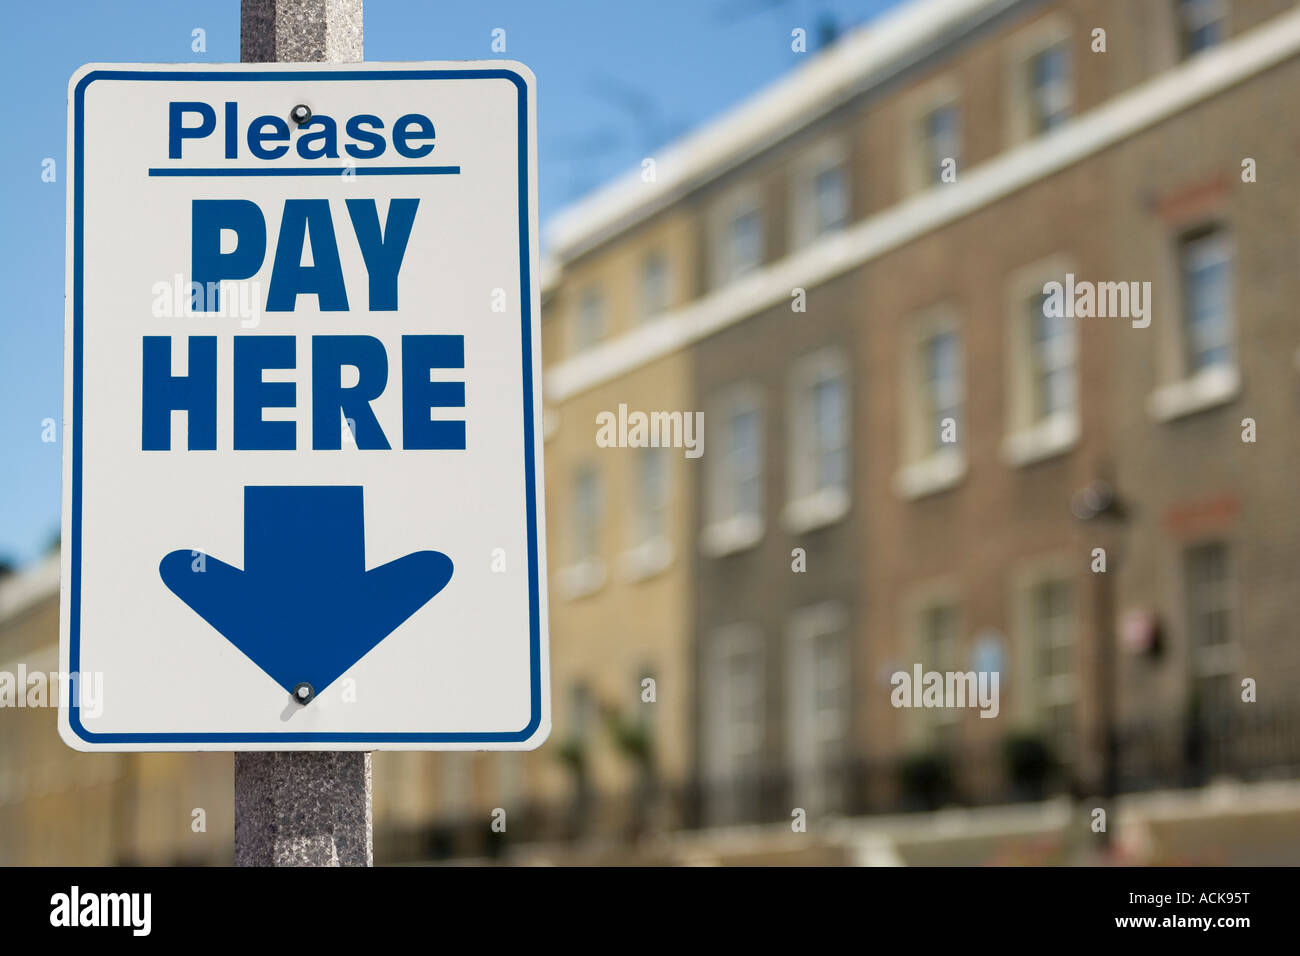 Please Pay Here sign with arrow pointing down Stock Photo